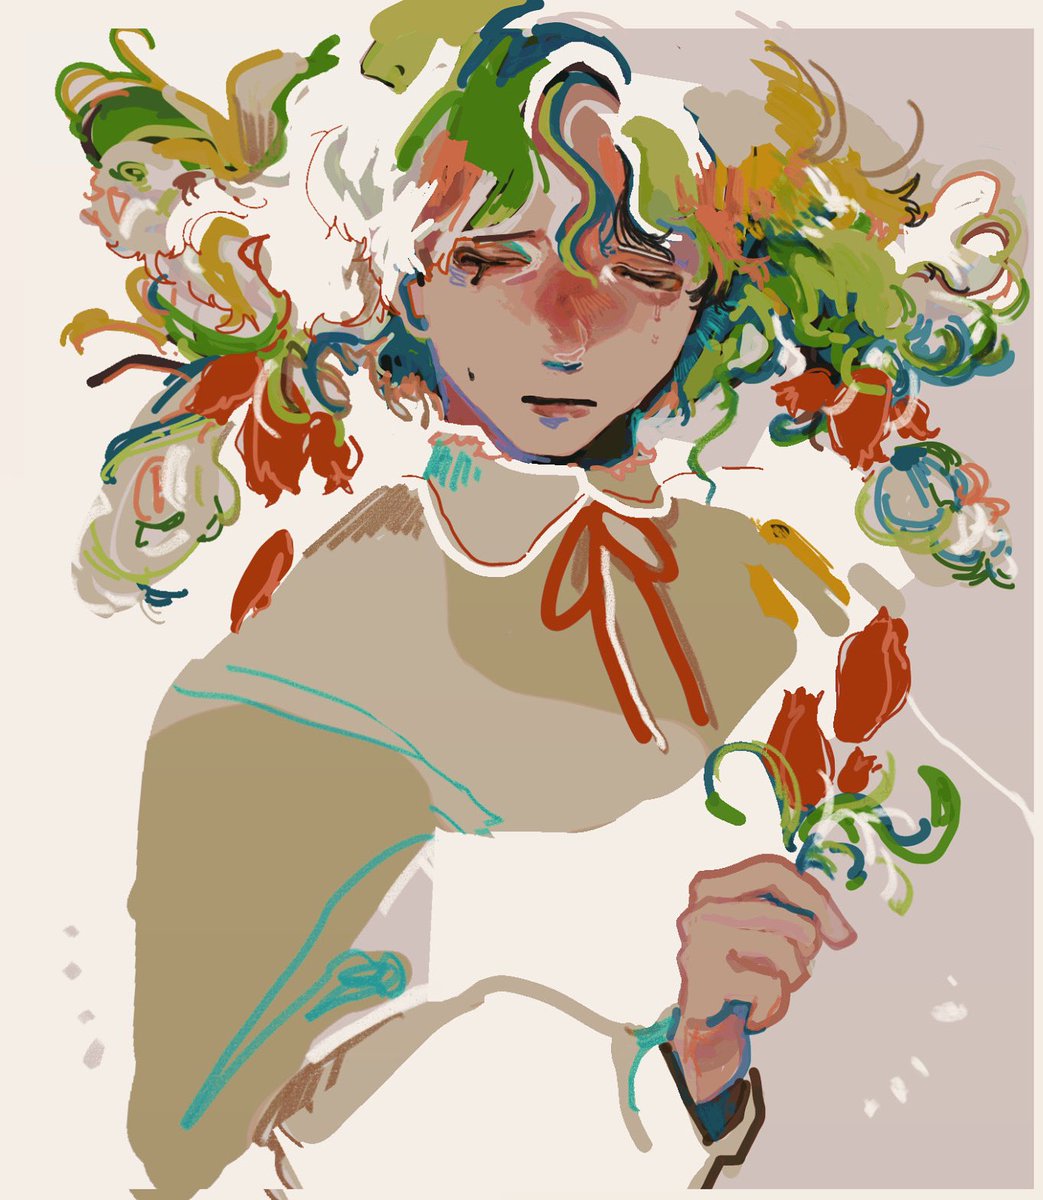 solo flower closed eyes holding holding flower green hair long sleeves  illustration images